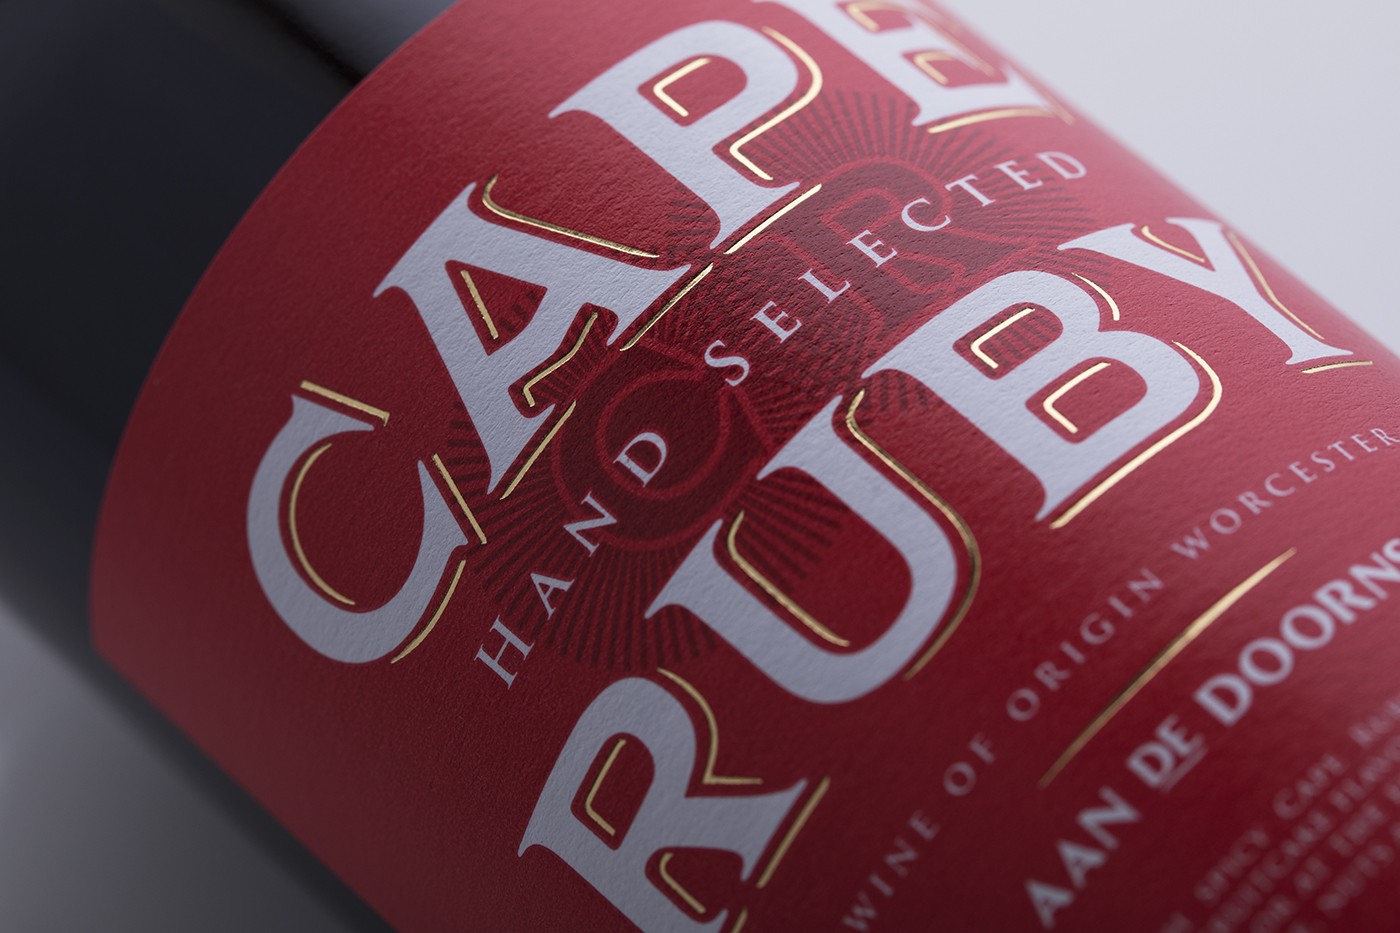 Stronger Shelf Presence with Packaging Design Revitalisation of South African Cape Ruby Wine Brand